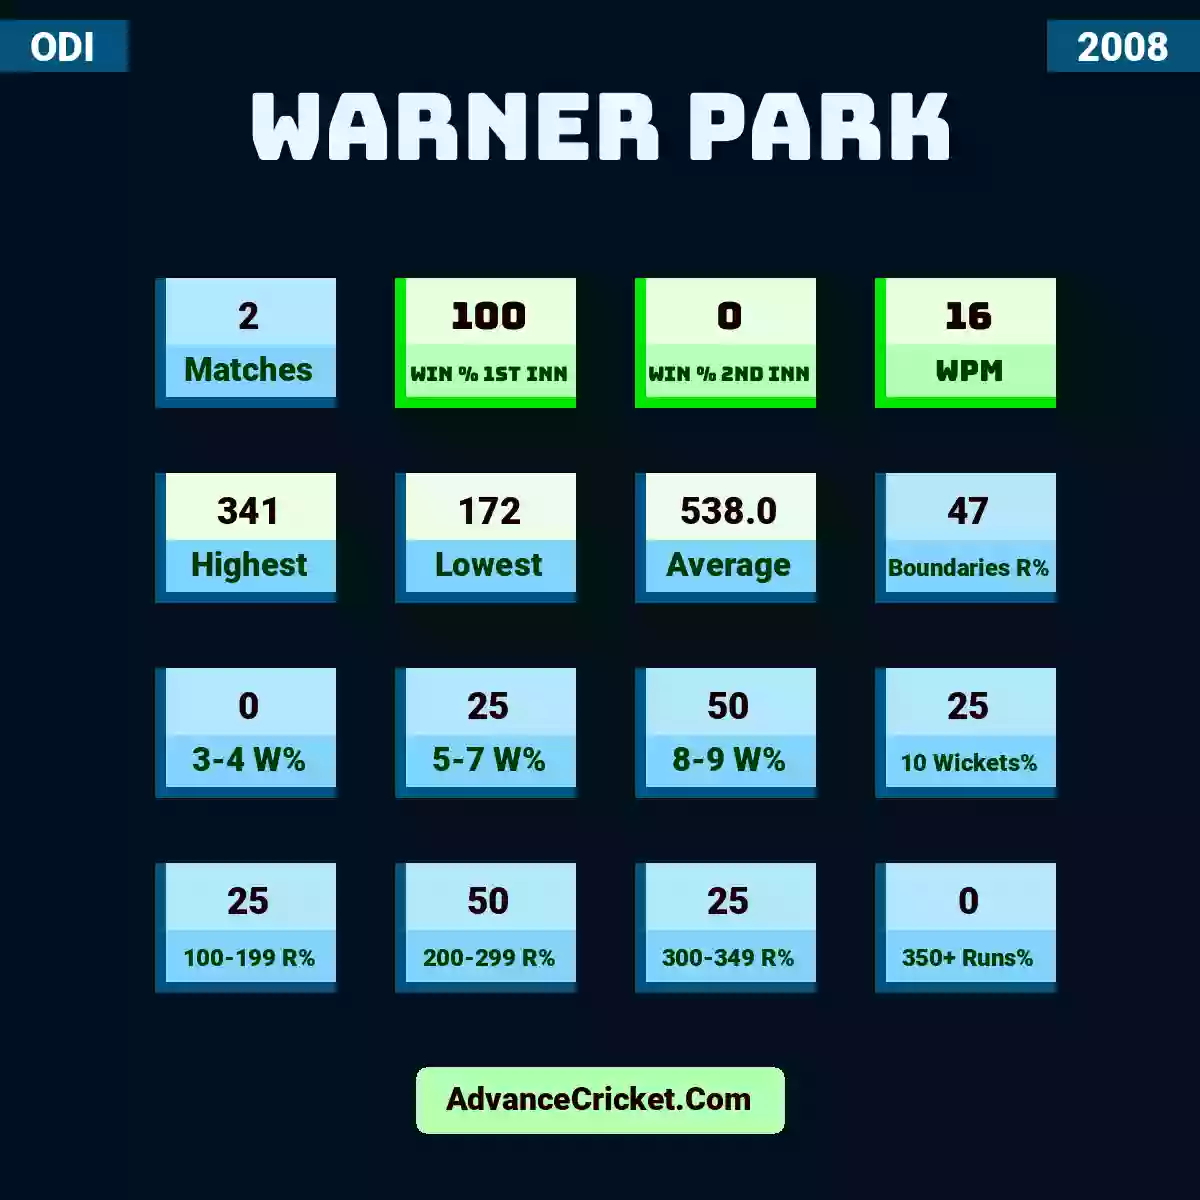 Image showing Warner Park with Matches: 2, Win % 1st Inn: 100, Win % 2nd Inn: 0, WPM: 16, Highest: 341, Lowest: 172, Average: 538.0, Boundaries R%: 47, 3-4 W%: 0, 5-7 W%: 25, 8-9 W%: 50, 10 Wickets%: 25, 100-199 R%: 25, 200-299 R%: 50, 300-349 R%: 25, 350+ Runs%: 0.